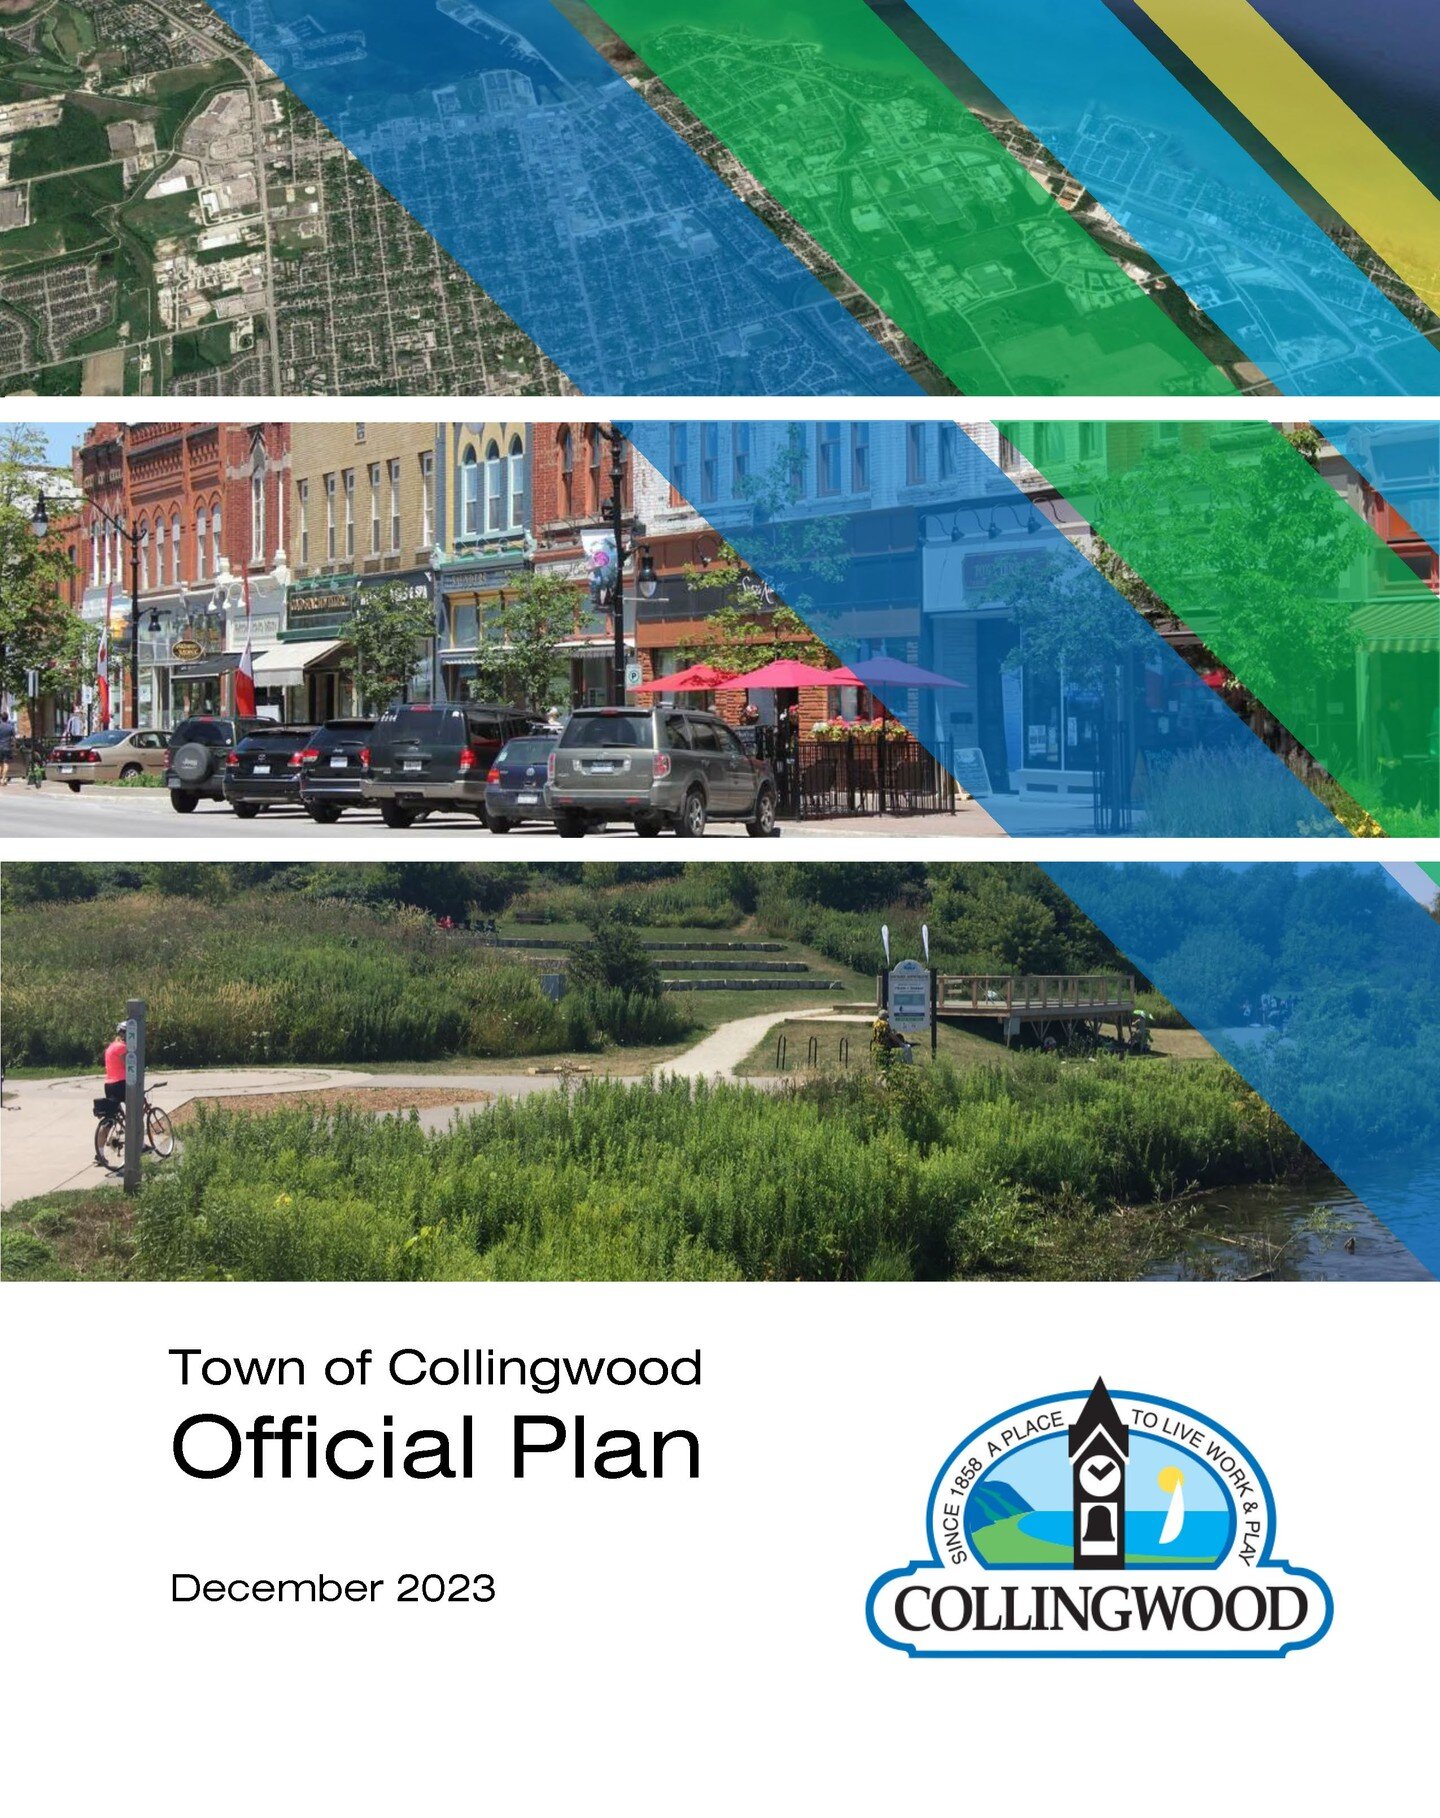 Looking back on our work with the Town of Collingwood, after three years of working closely with the Town and an intensive public consultation process, we are pleased to report that Collingwood Council adopted the Town's new Official Plan in December